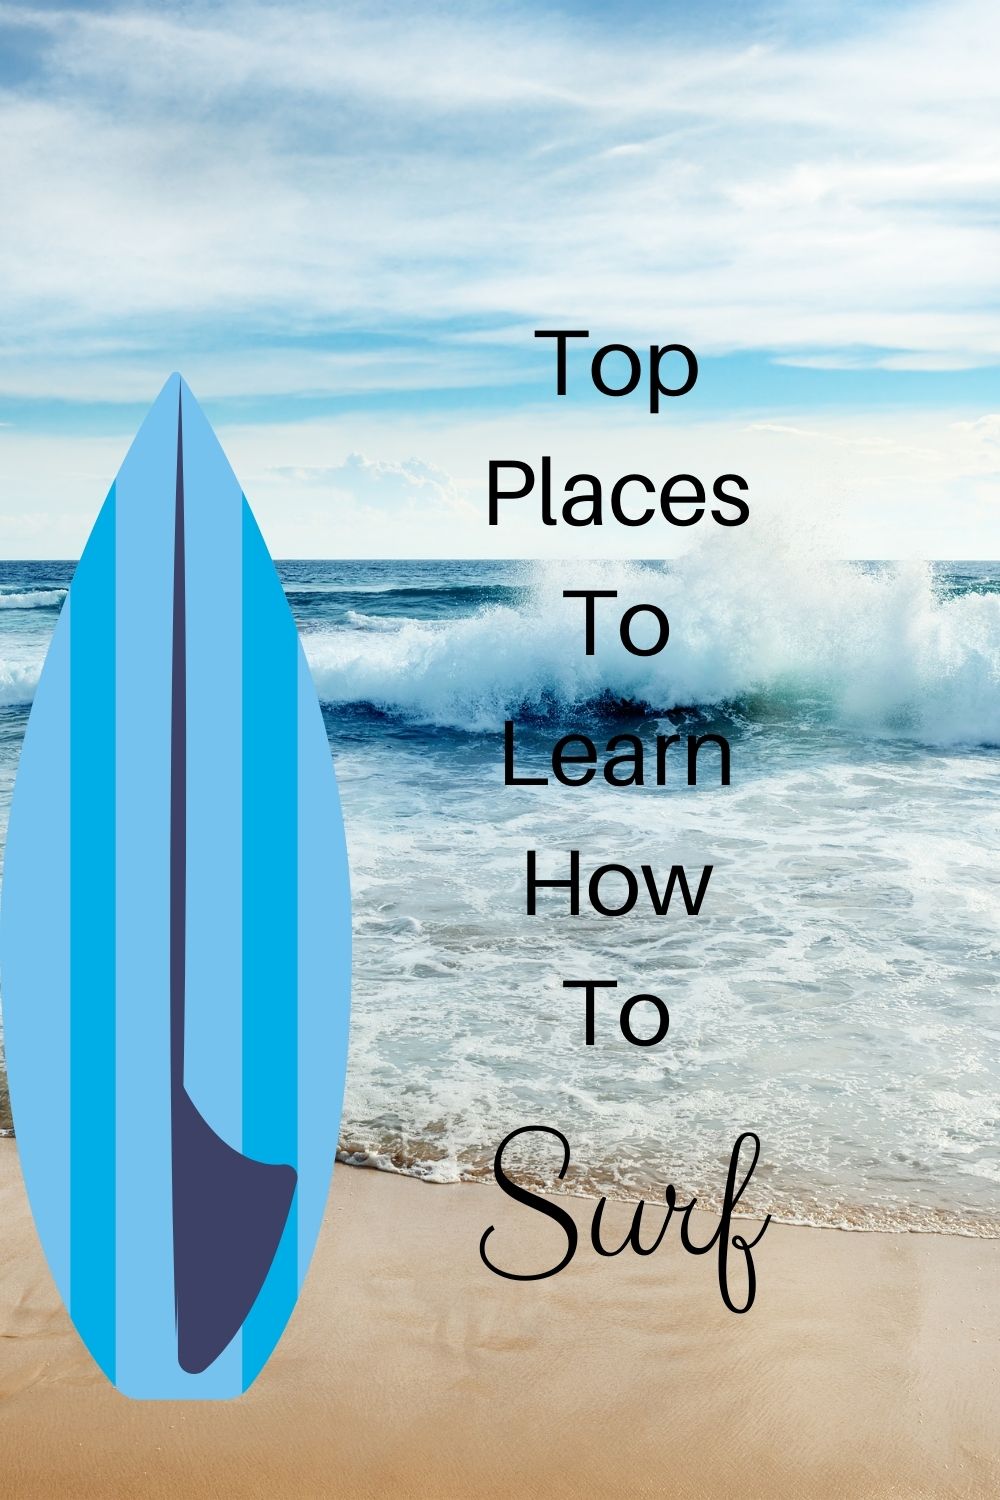 Top Places To Learn How To Surf 1